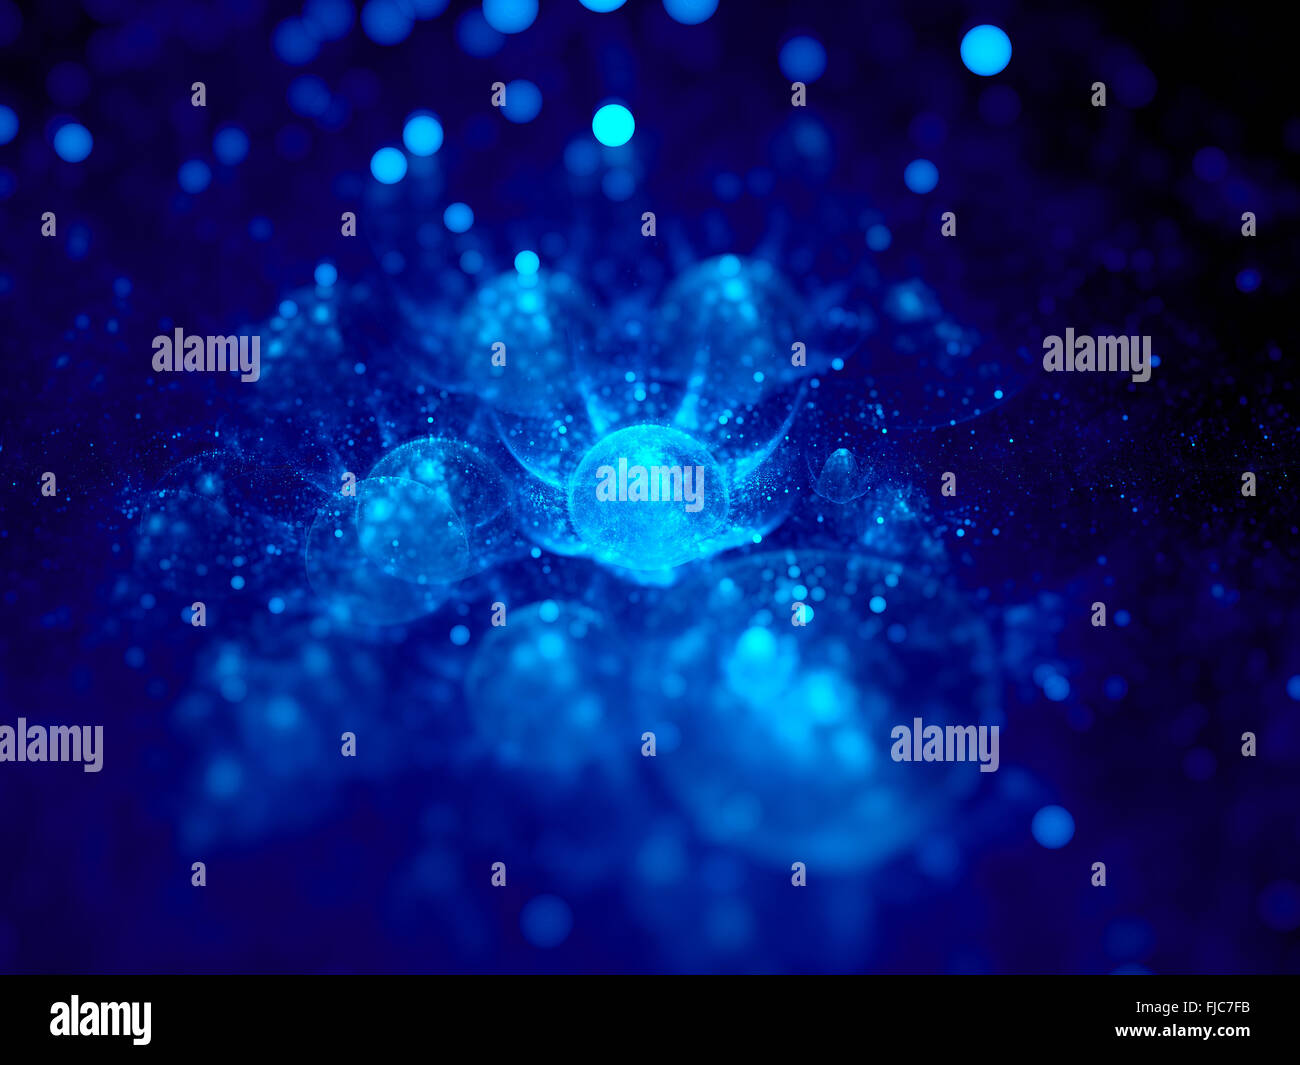 Microscopic blue glowing sphere, computer generated abstract background Stock Photo